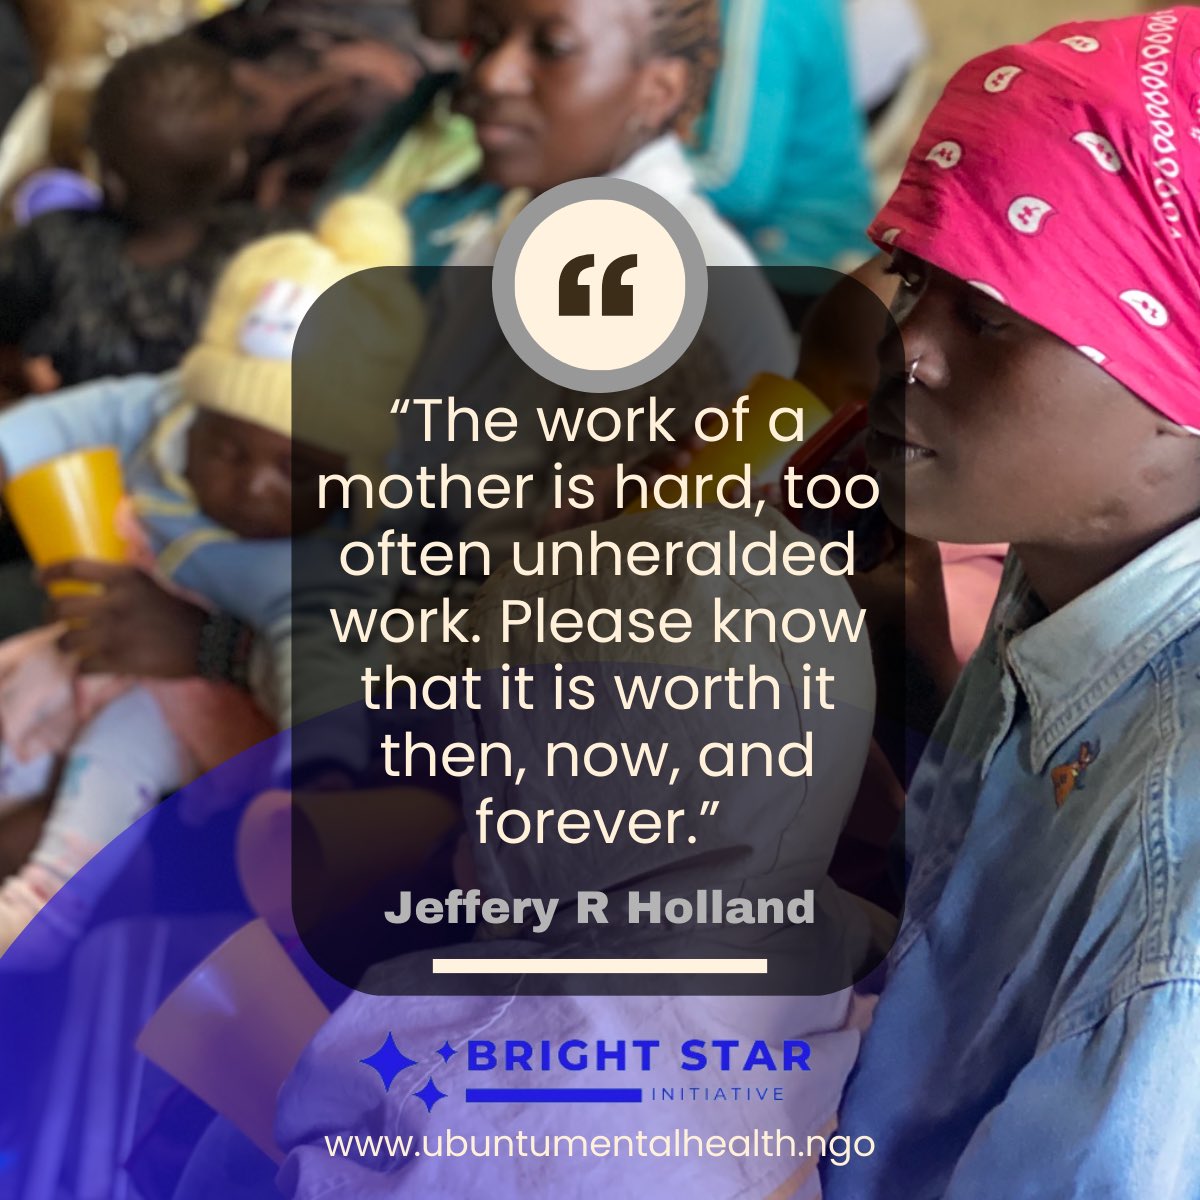 Motherhood is worth it. It was worth it then. It is worth it now and it will be worth it forever.

#Motherhood #mentalhealth #BrightStar #Ubuntumentalhealth